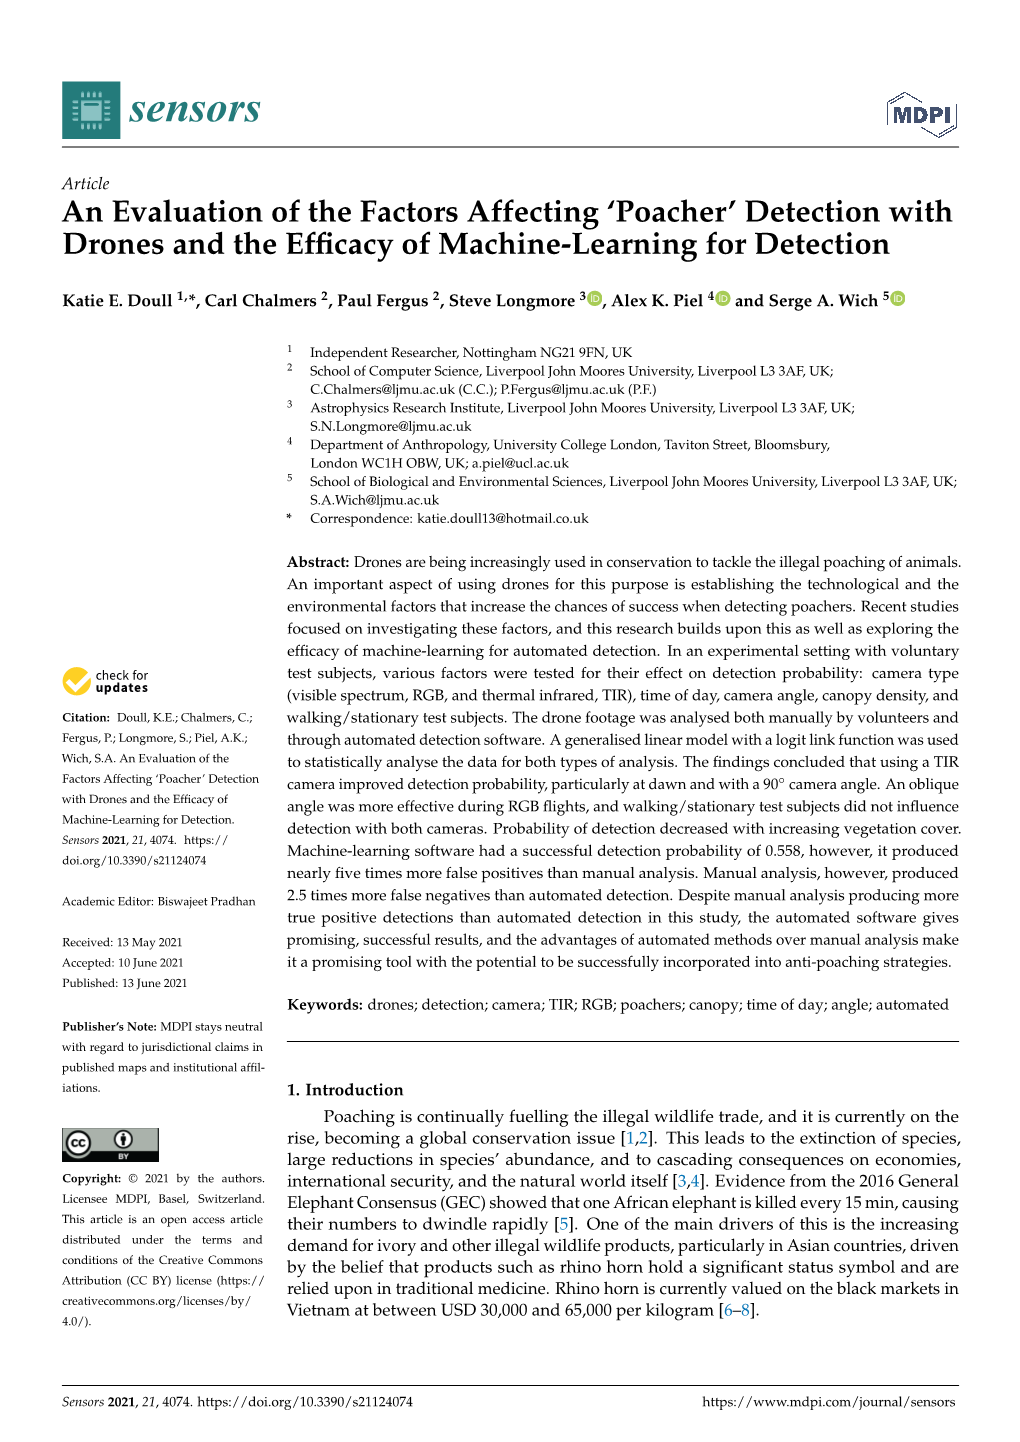 Poacher’ Detection with Drones and the Efﬁcacy of Machine-Learning for Detection